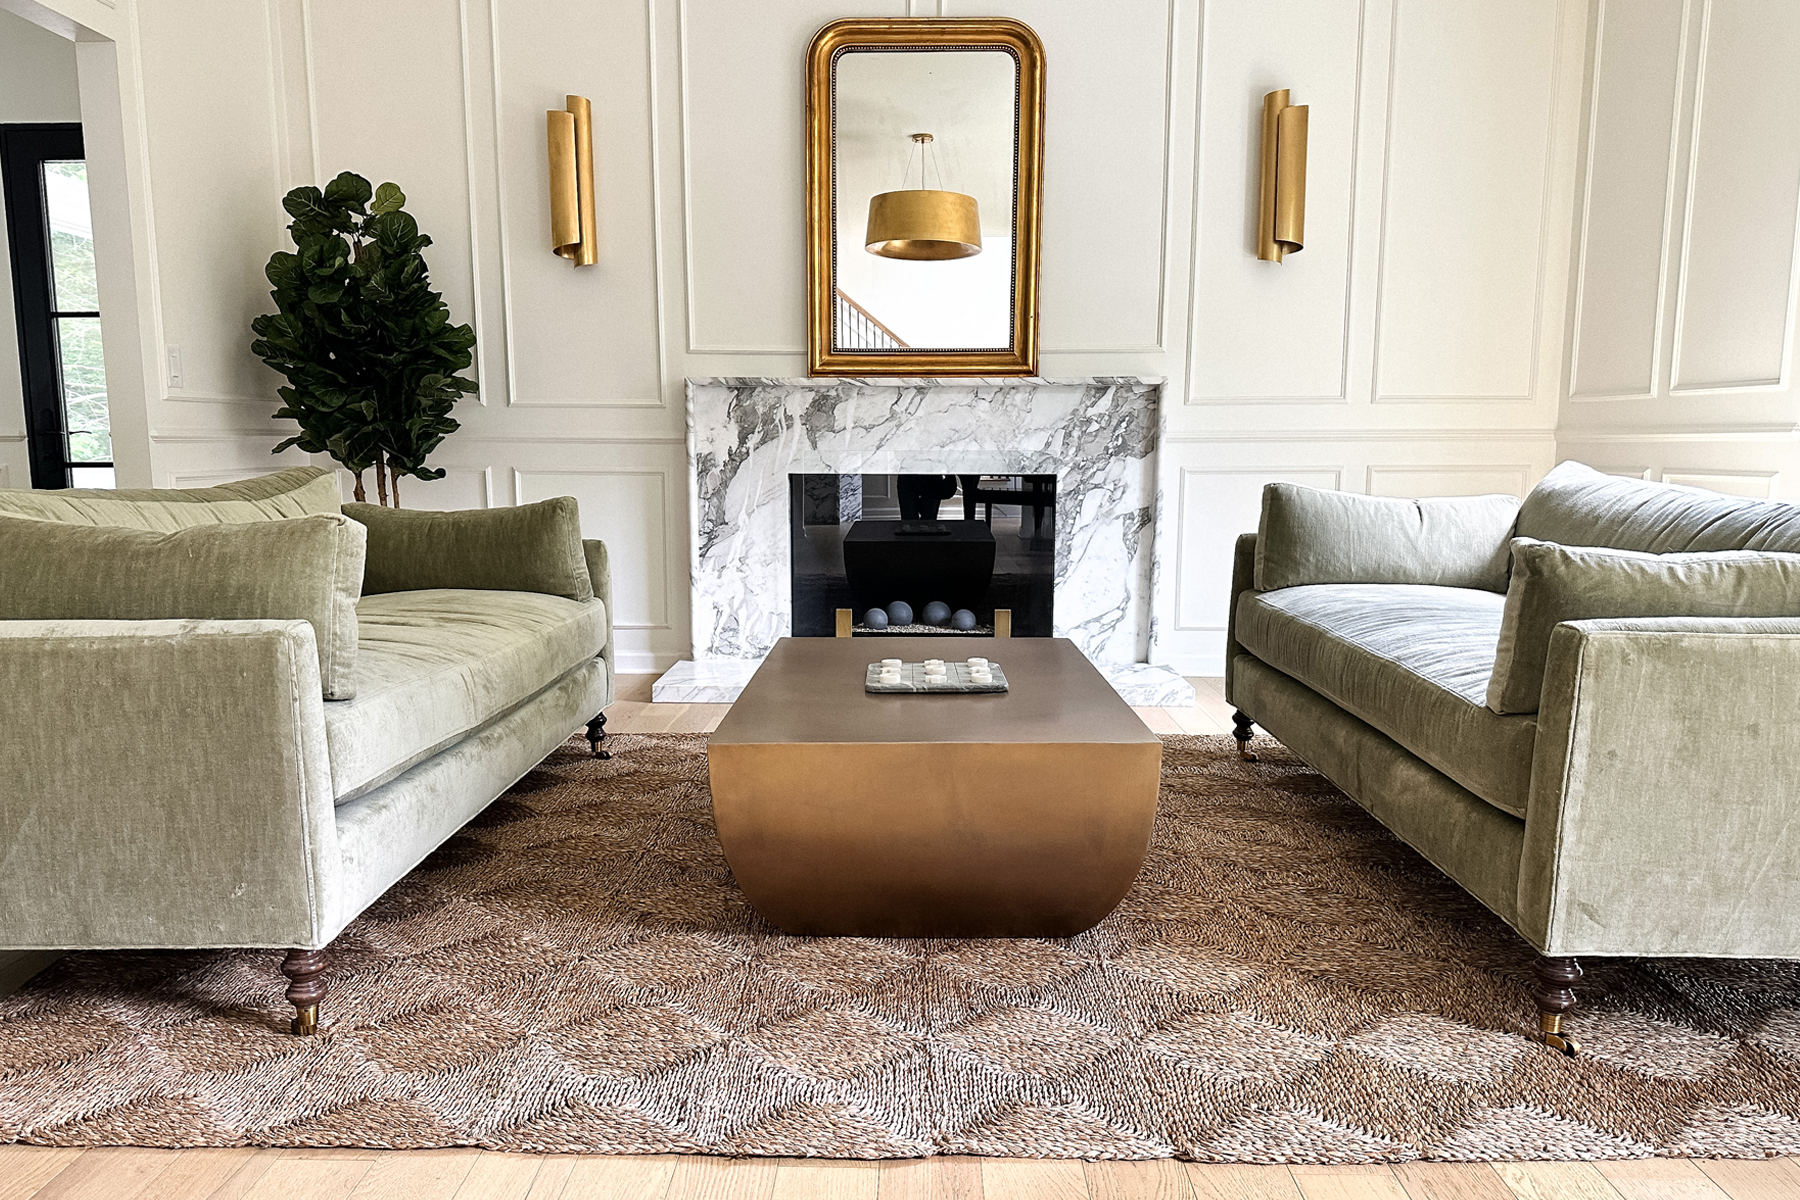 Fashion Jackson Formal Living Room Transitional Home Decor Marble Fireplace Green Velvet Couches Jute Rug Fiddle Leaf Fig Tree Louis Philippe Gilt Wall Mirror Brass Coffee Table Aerin Iva Sconces Gold Halo Pendant